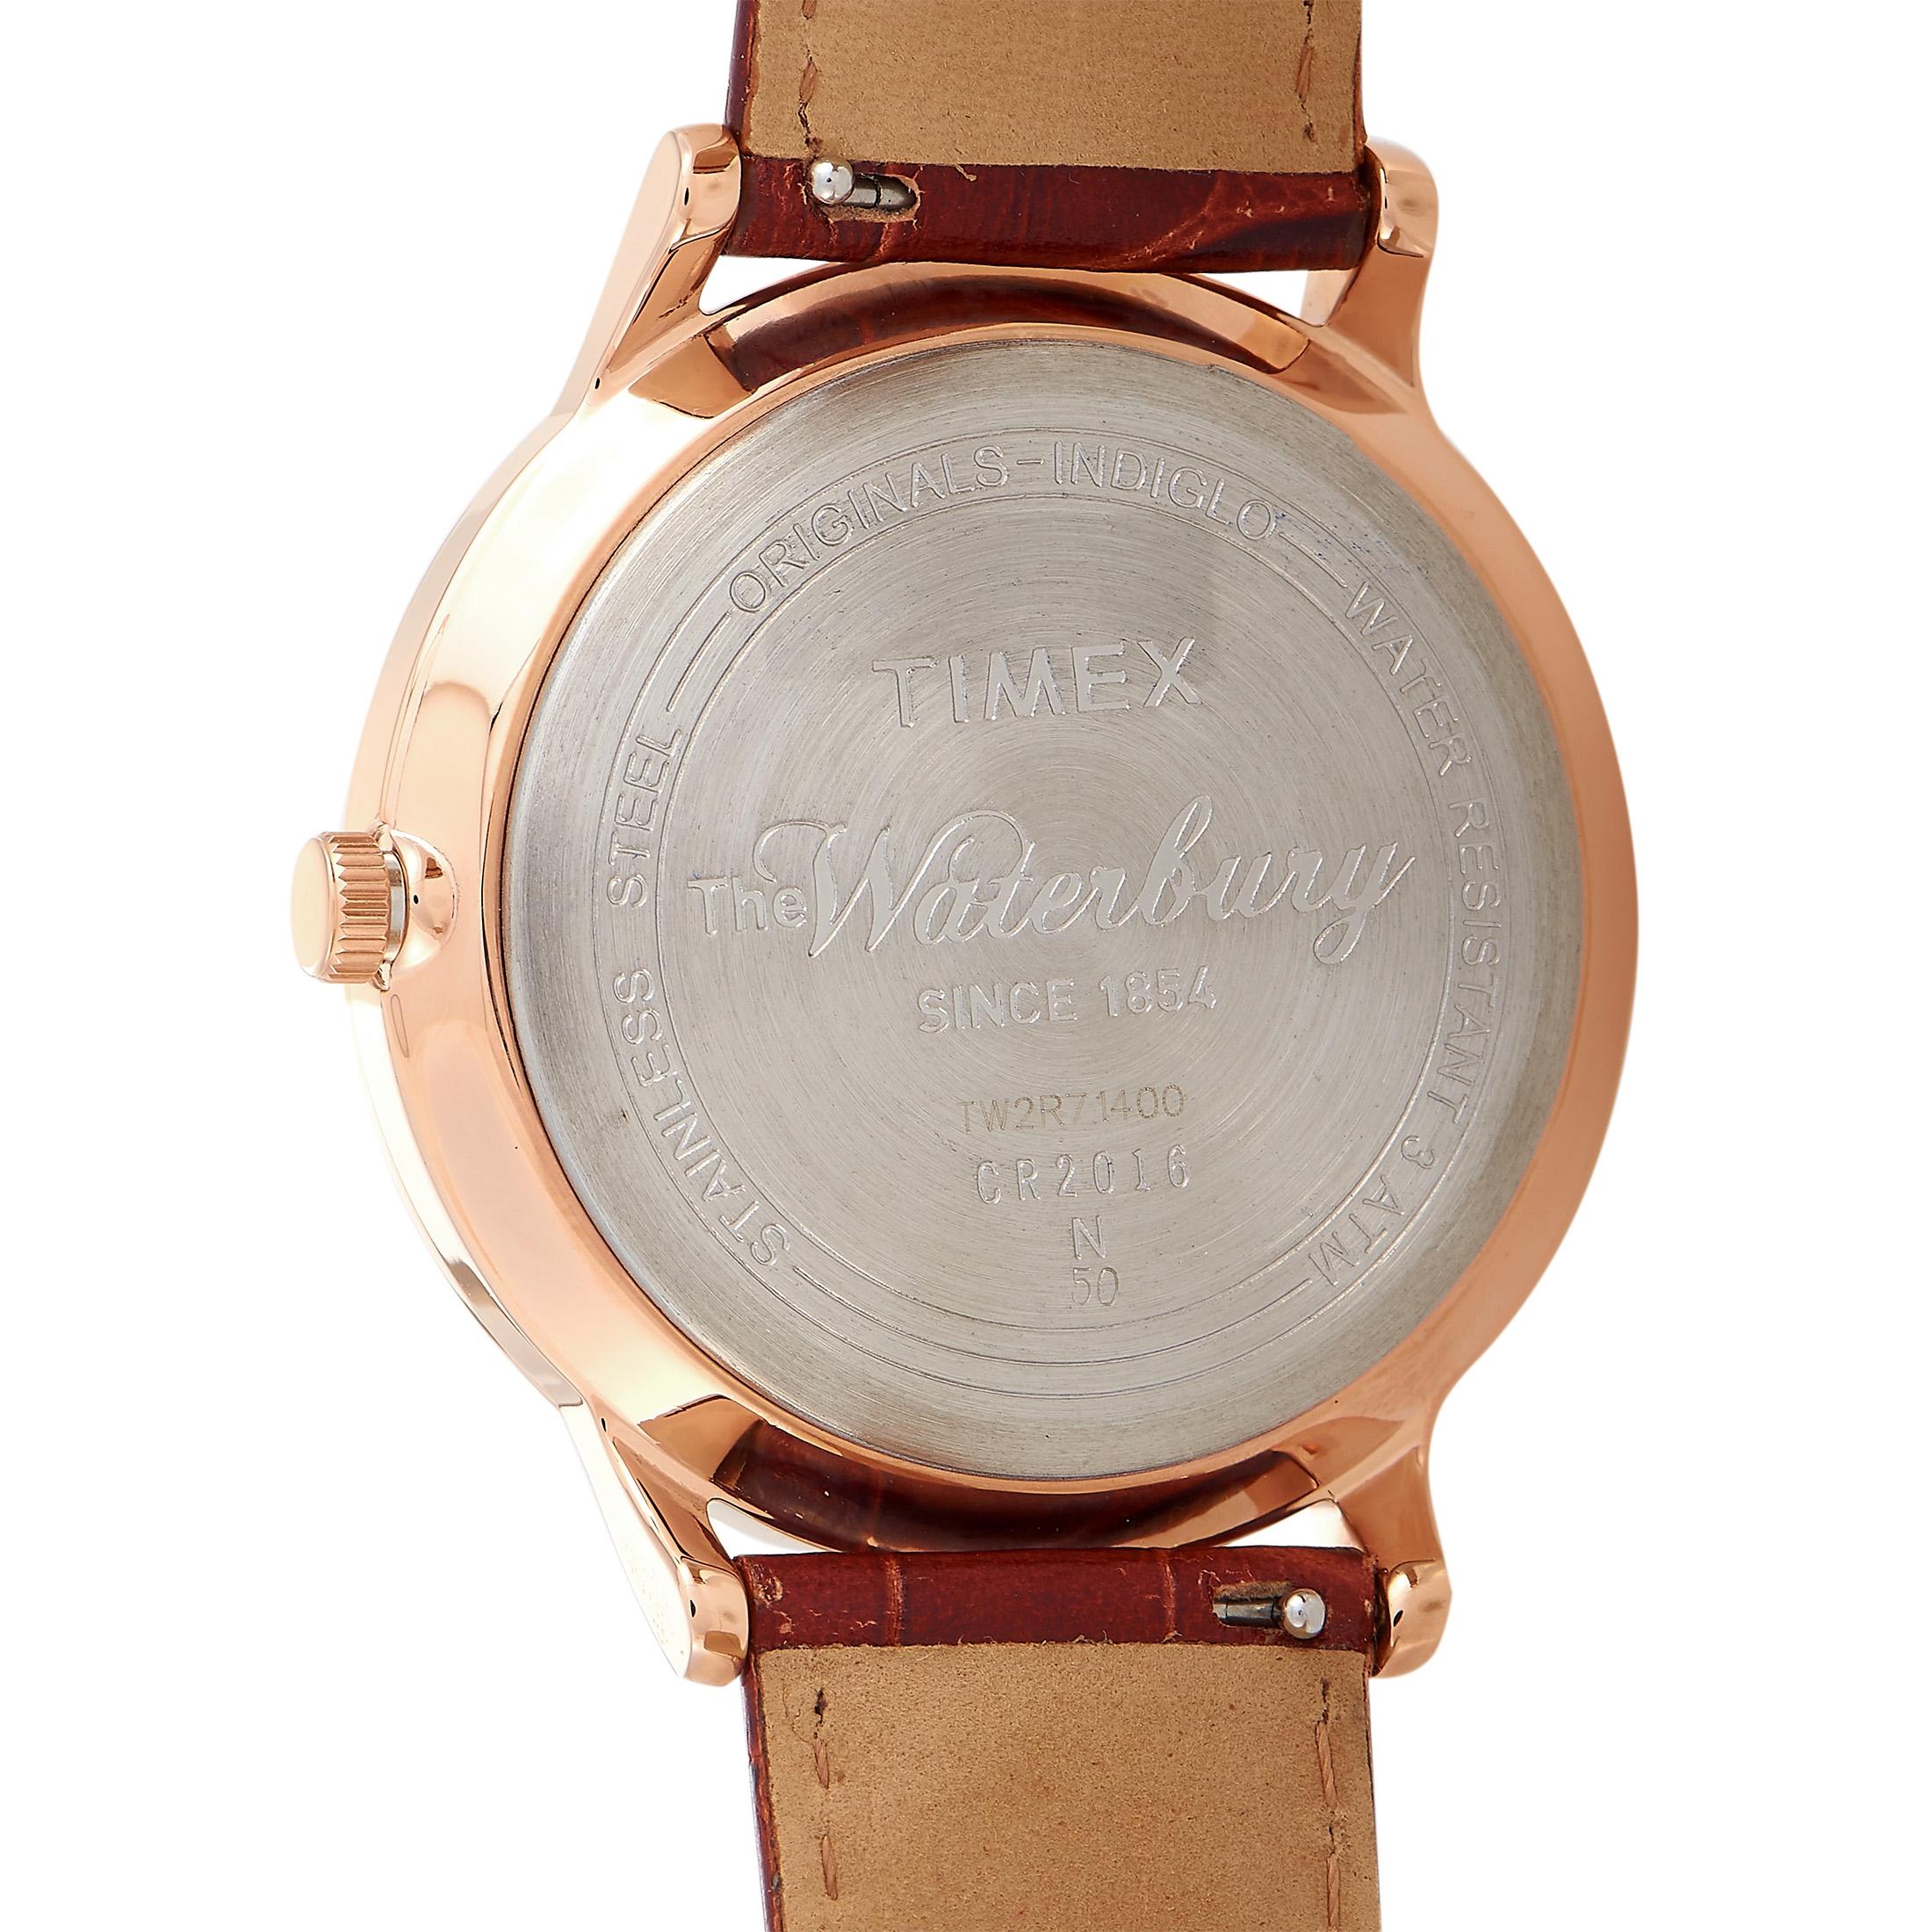 The Timex Waterbury Classic, reference number TW2R71400, is a member of the exquisite “Waterbury” collection.
 
 The watch comes with a rose gold-tone stainless steel case that measures 40 mm in diameter. The case is presented on a brown leather